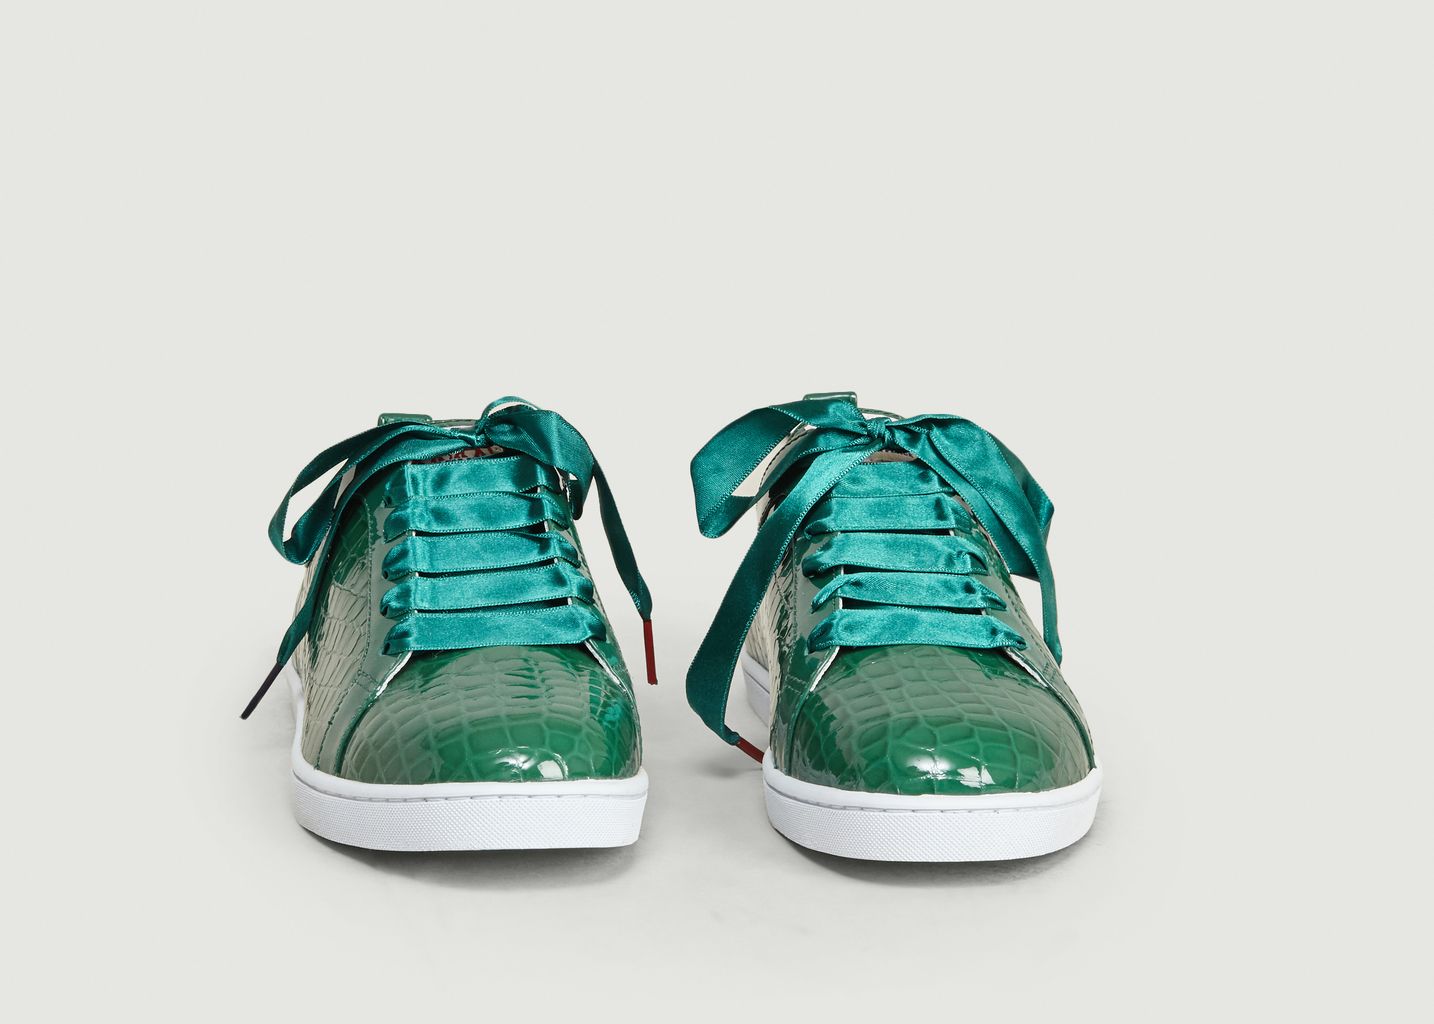 Boubou Croco Sneakers - Twins For Peace